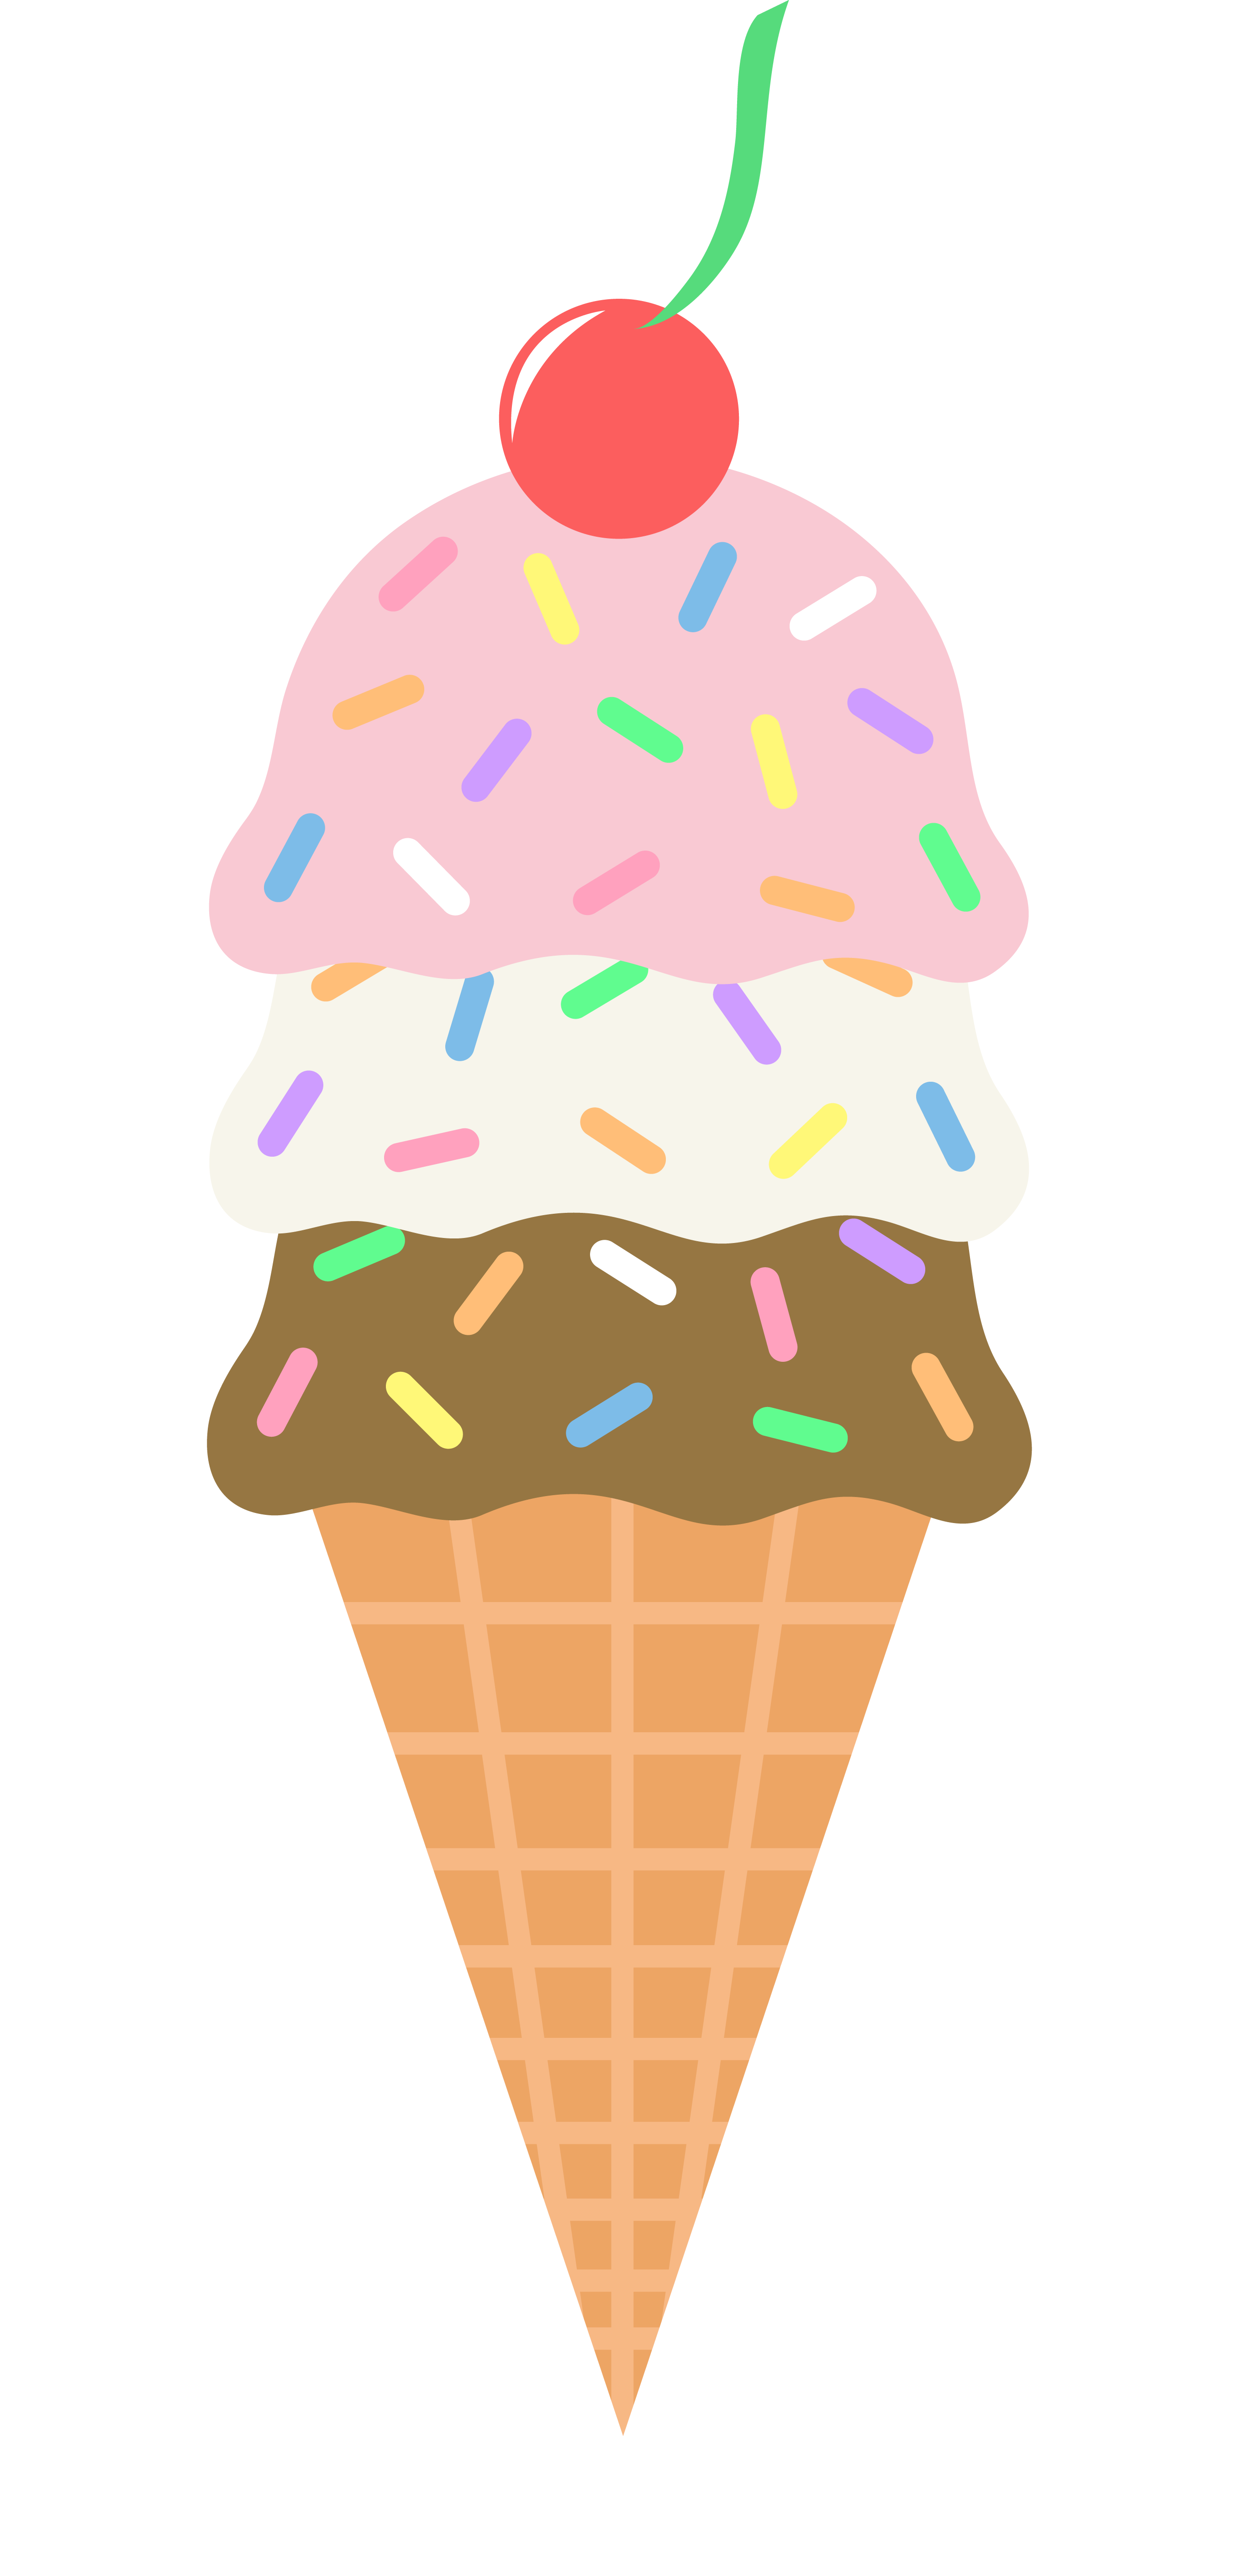 covenant clipart - Clipart Of Ice Cream